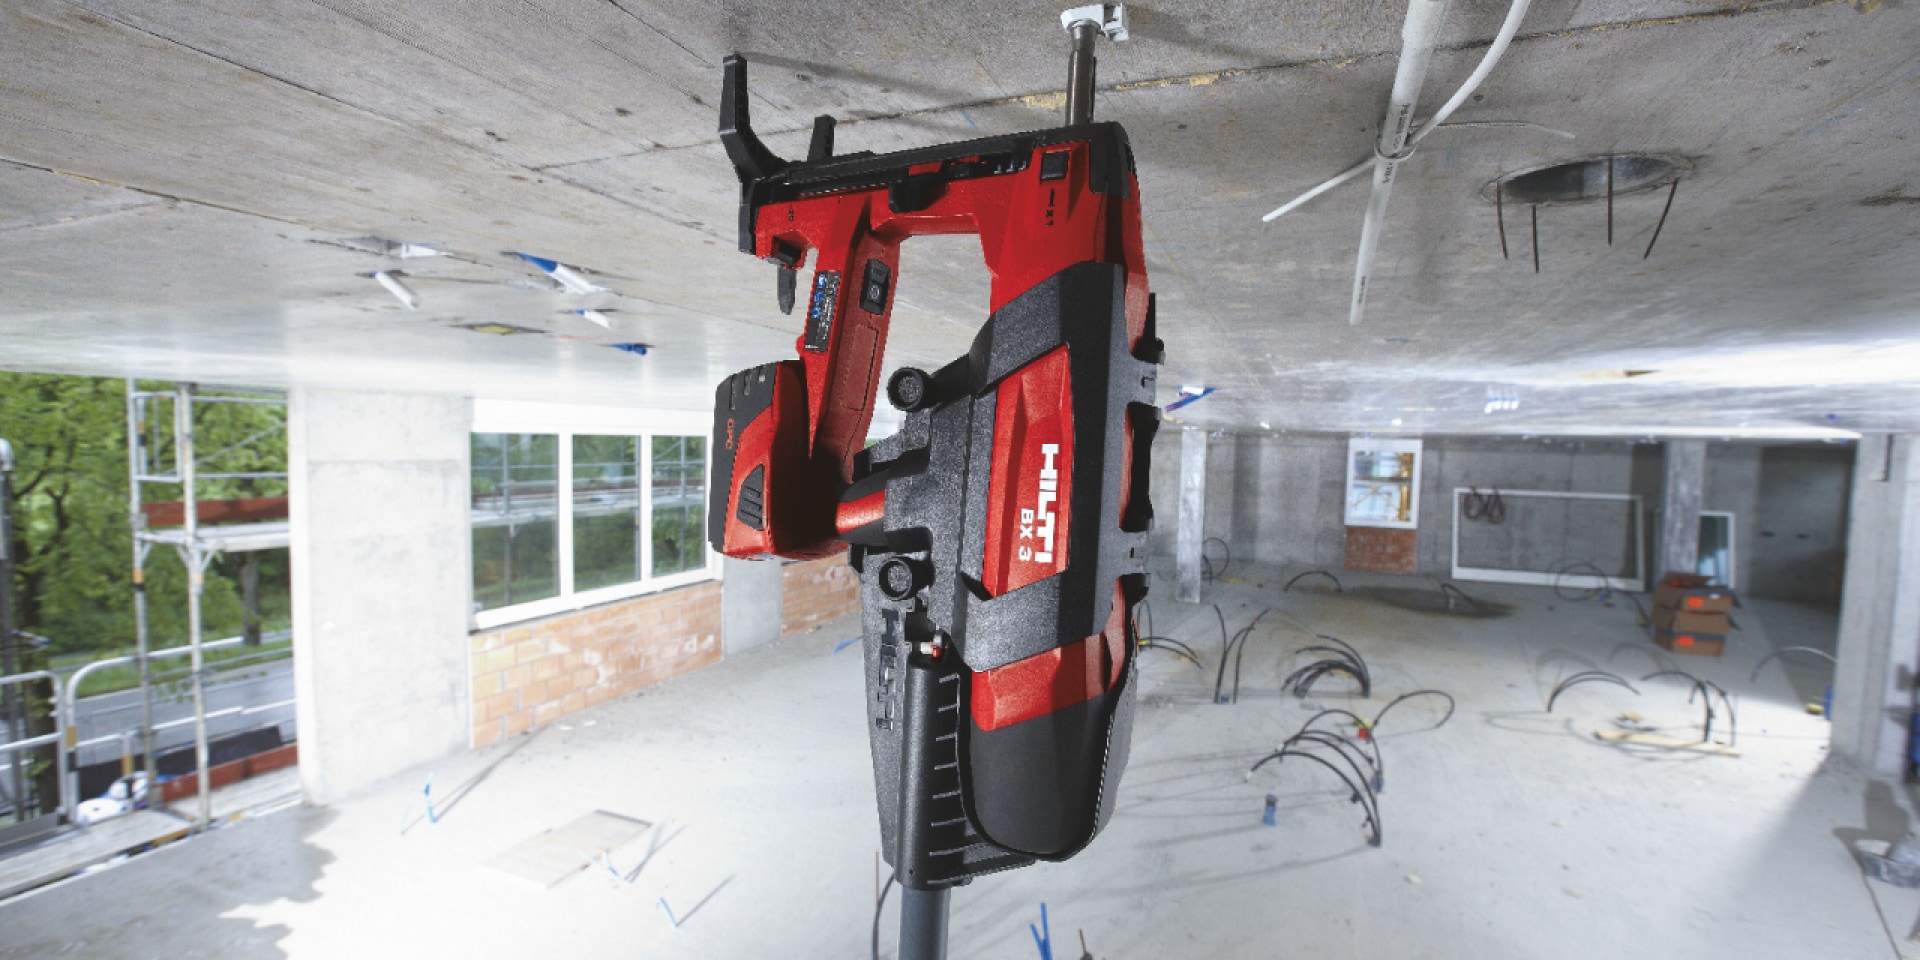 Hilti tool safety features